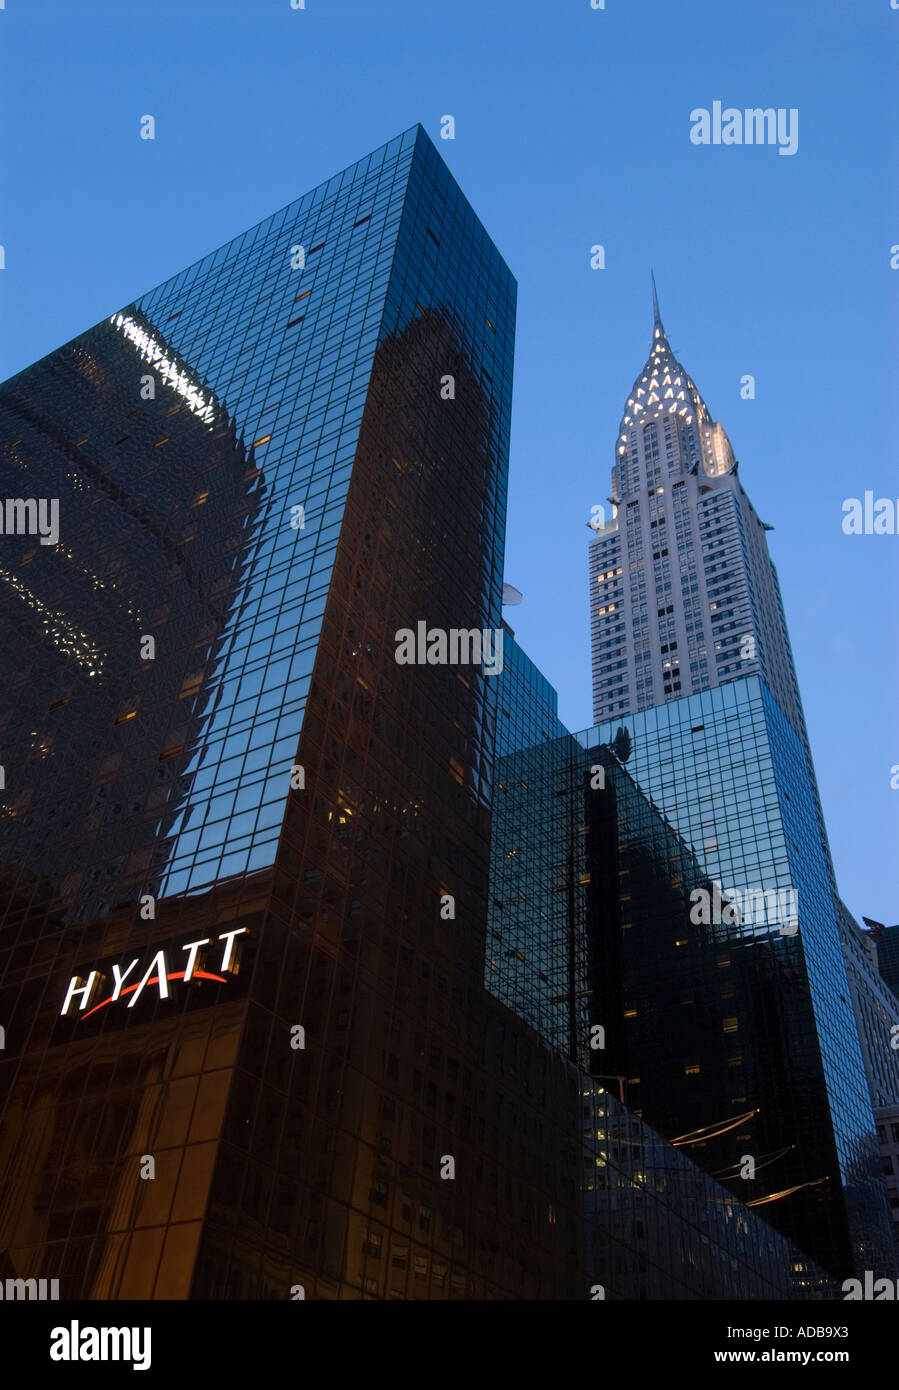 Chrysler Building at twilight with Hyatt hotel in the foreground Stock Photo